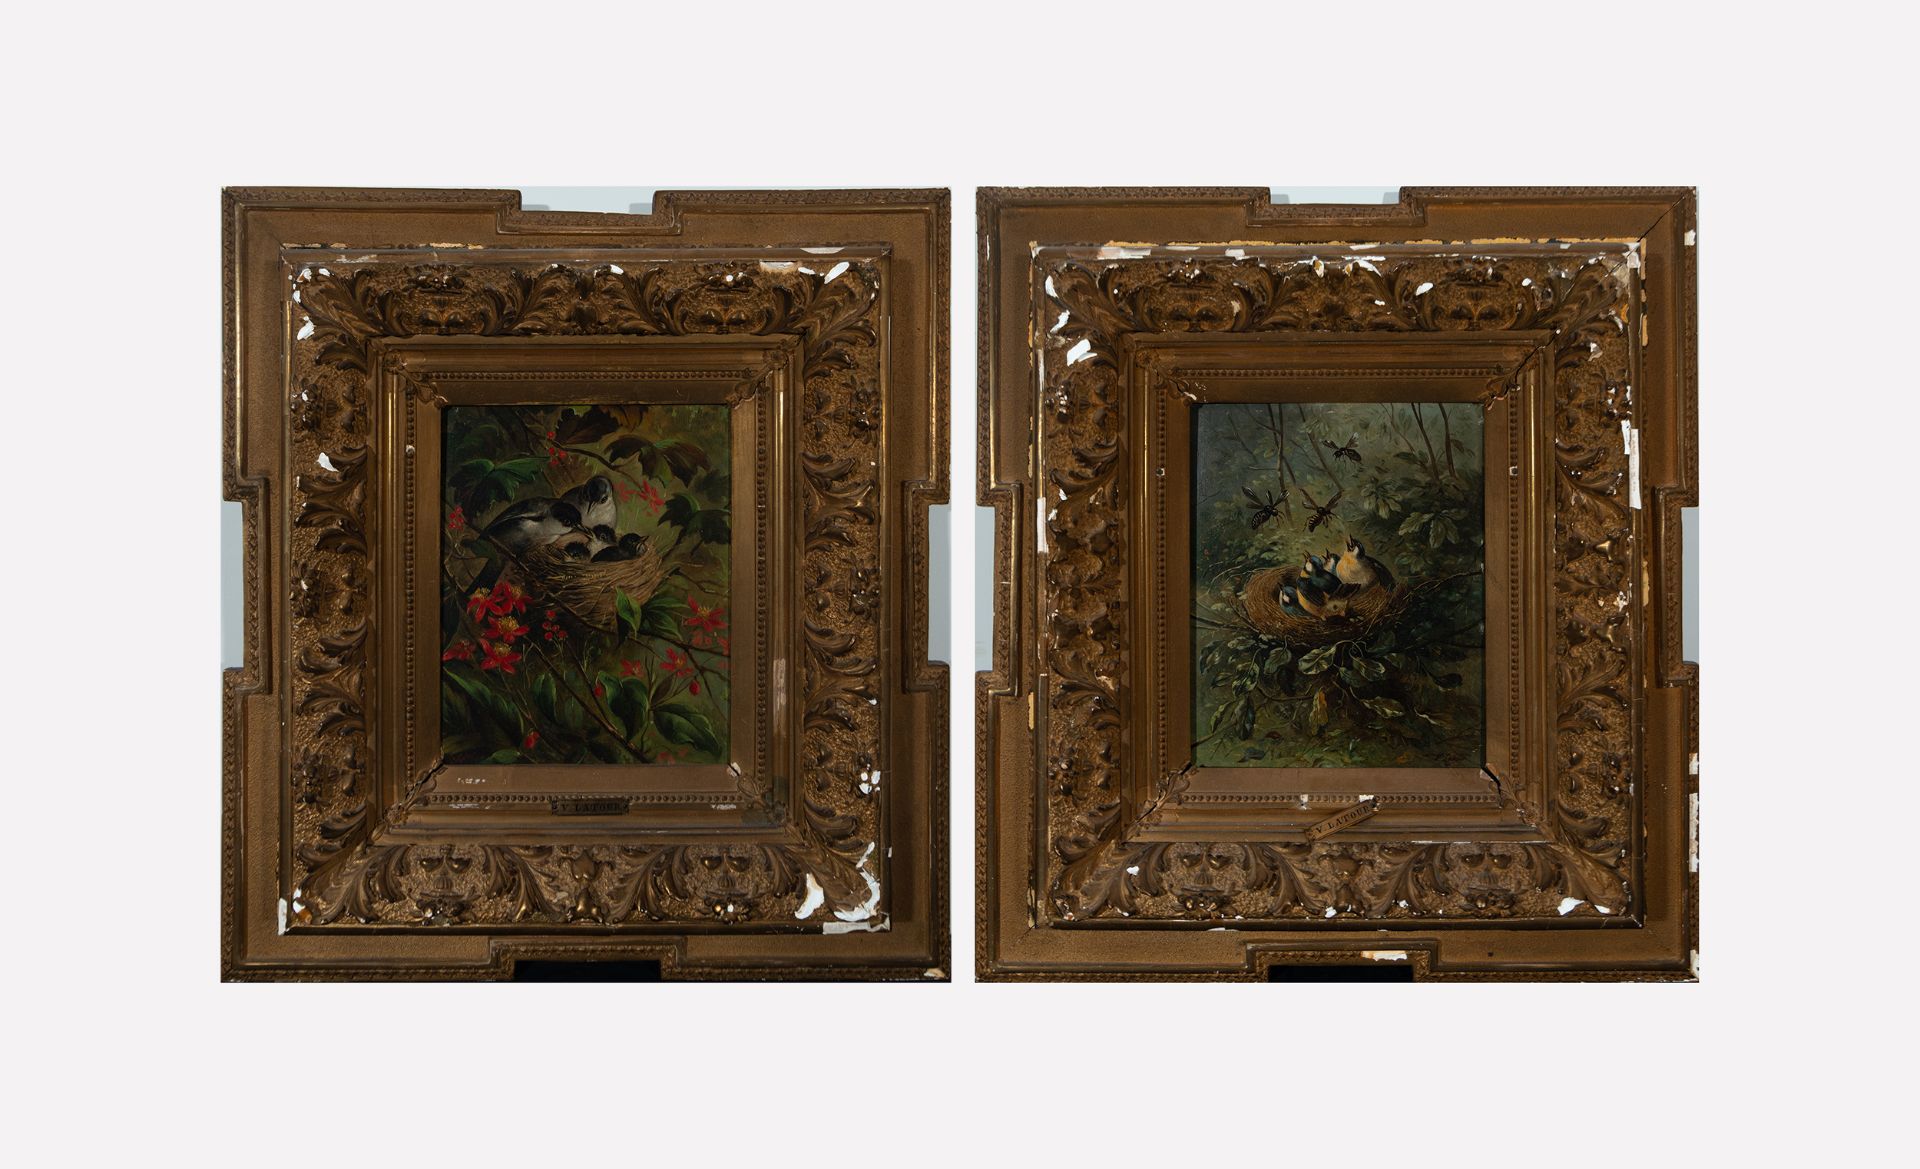 Pair of Oils on panel of Birds in a Nest, French school of the 19th century, signed V. Latour